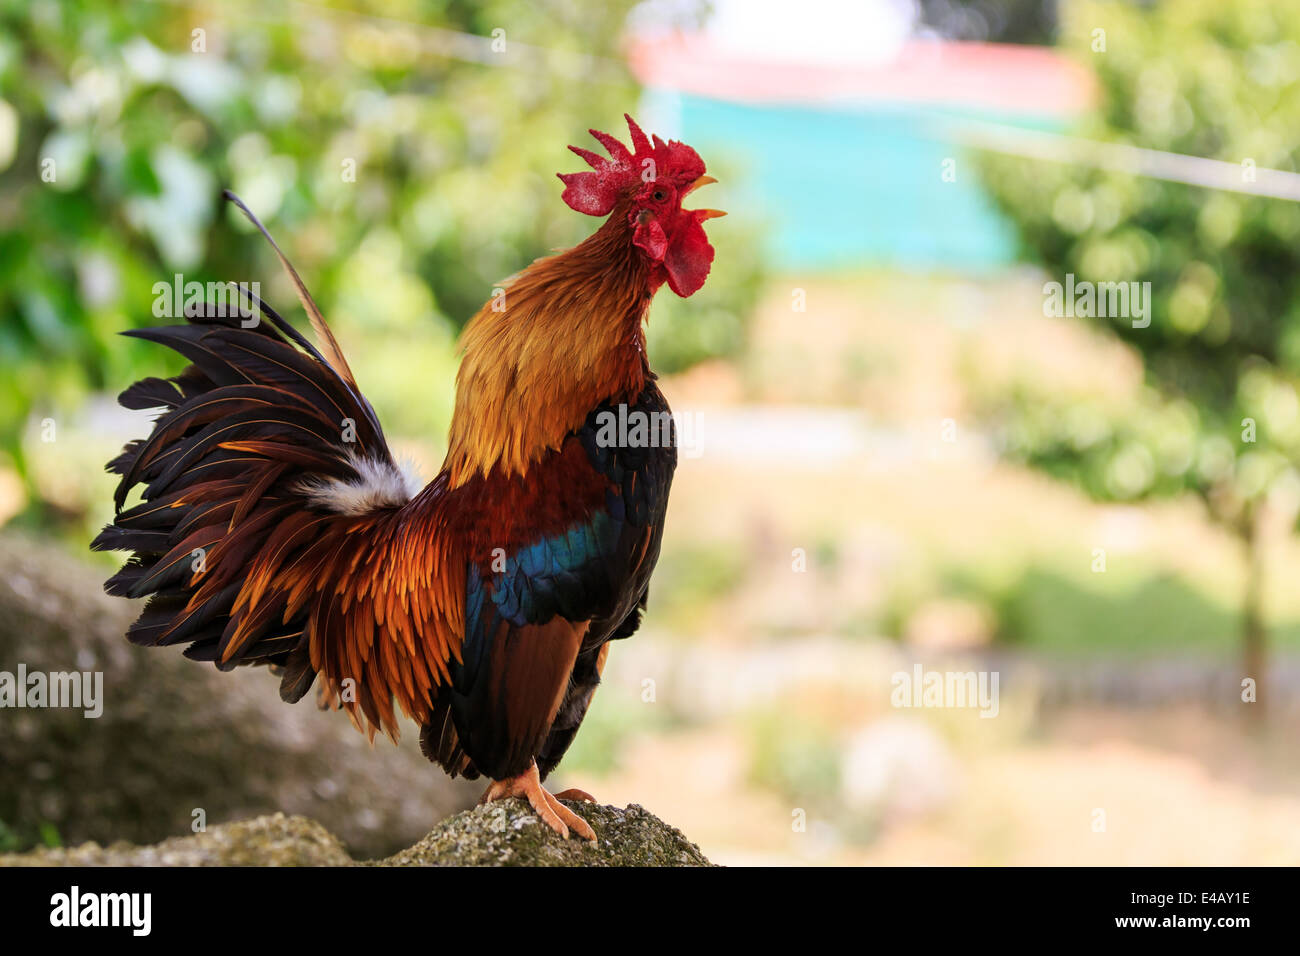 Horizontal photo of a male Colorful Rooster crowing Stock Photo